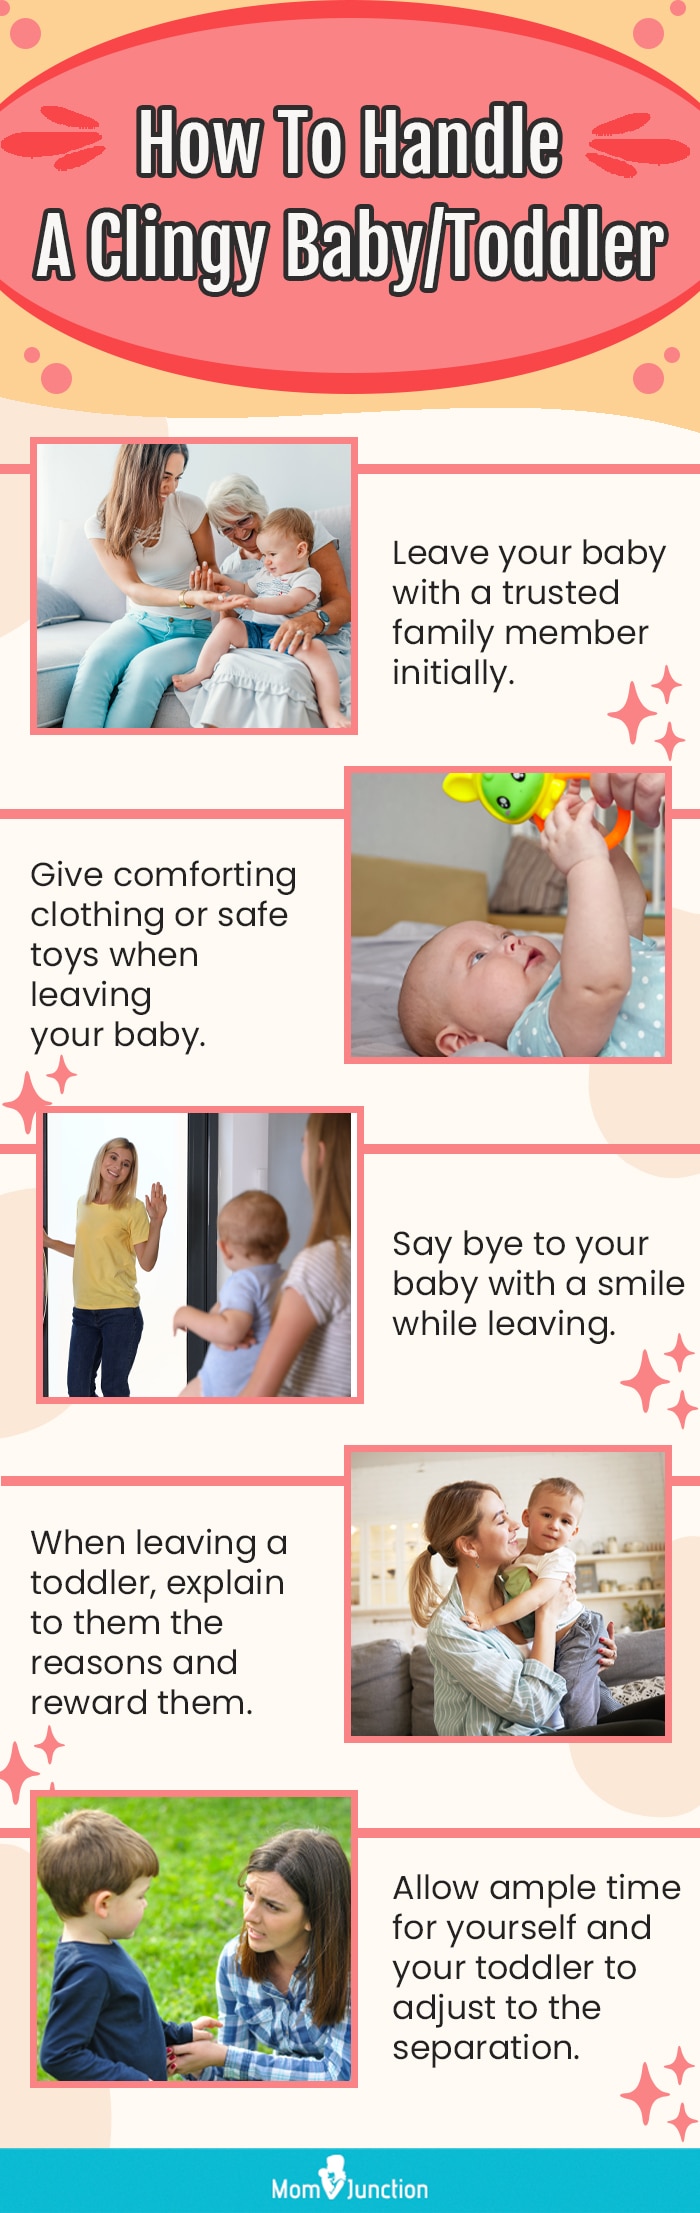 how to handle a clingy baby toddler (infographic)